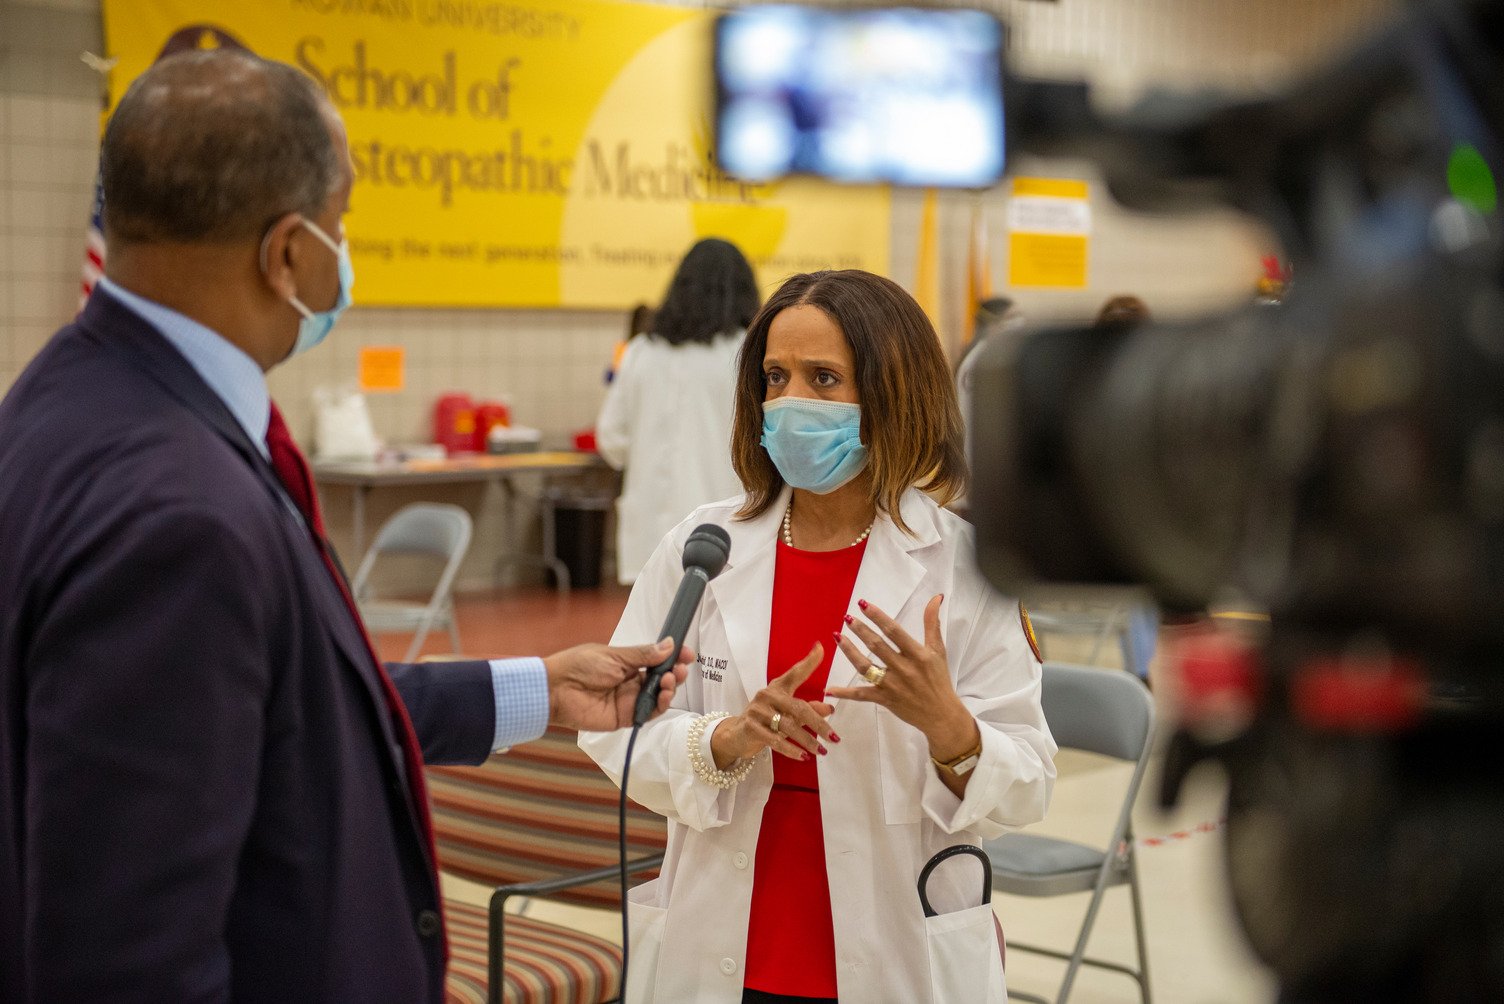 A woman in a medical mask and physician's coat speaks to a man holding a microphone